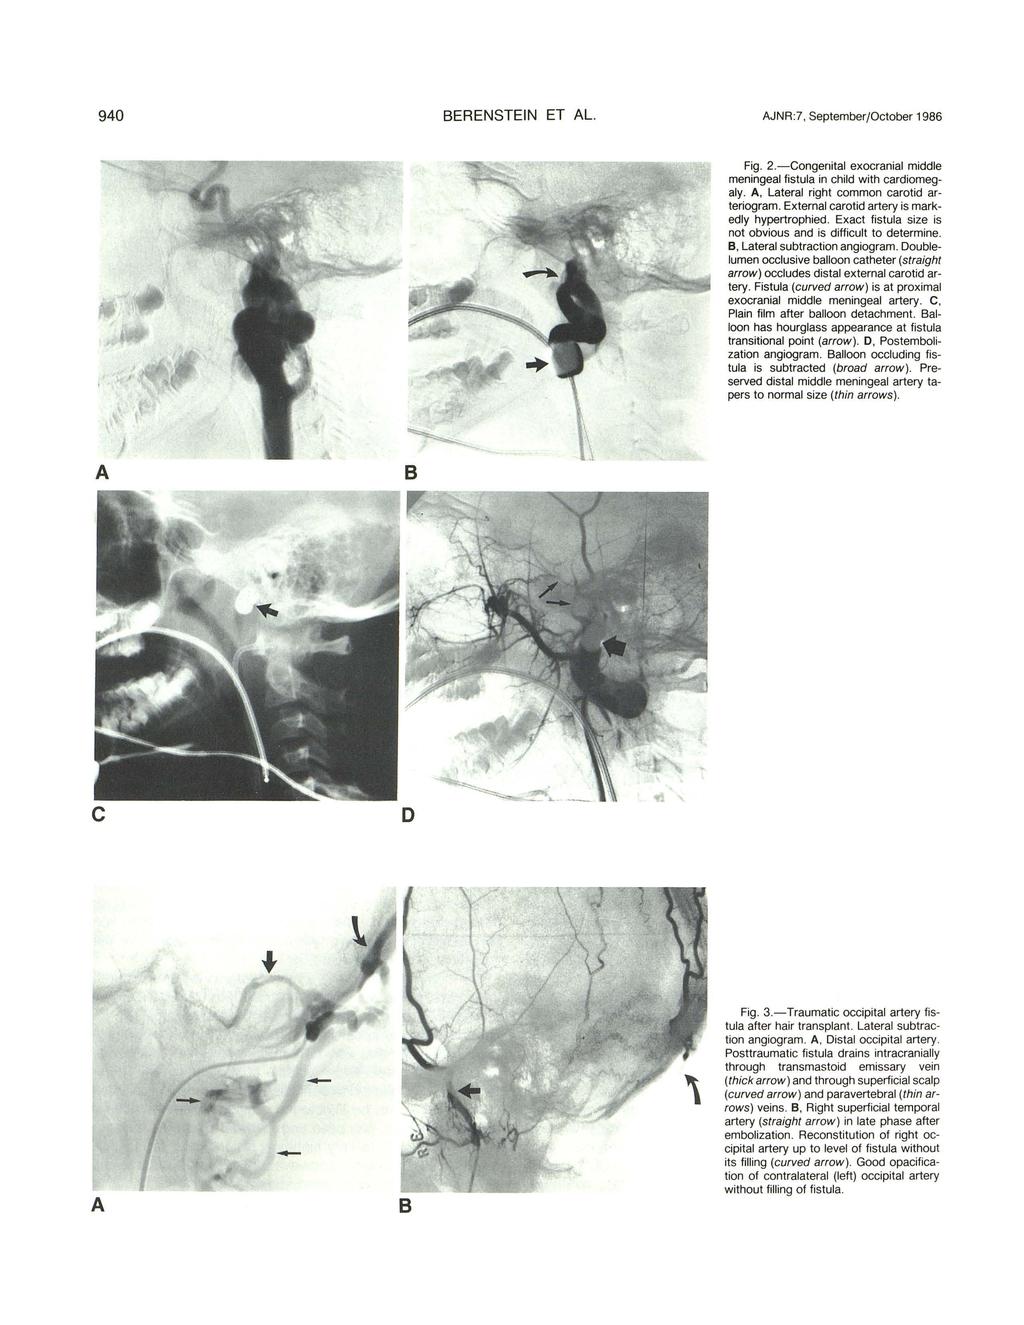 940 ERENSTEIN ET L. JNR:7, September/October 1986 Fig. 2.-Congenital exocranial middle meningeal fistula in child with cardiomegaly., Lateral right common carotid arteriogram.